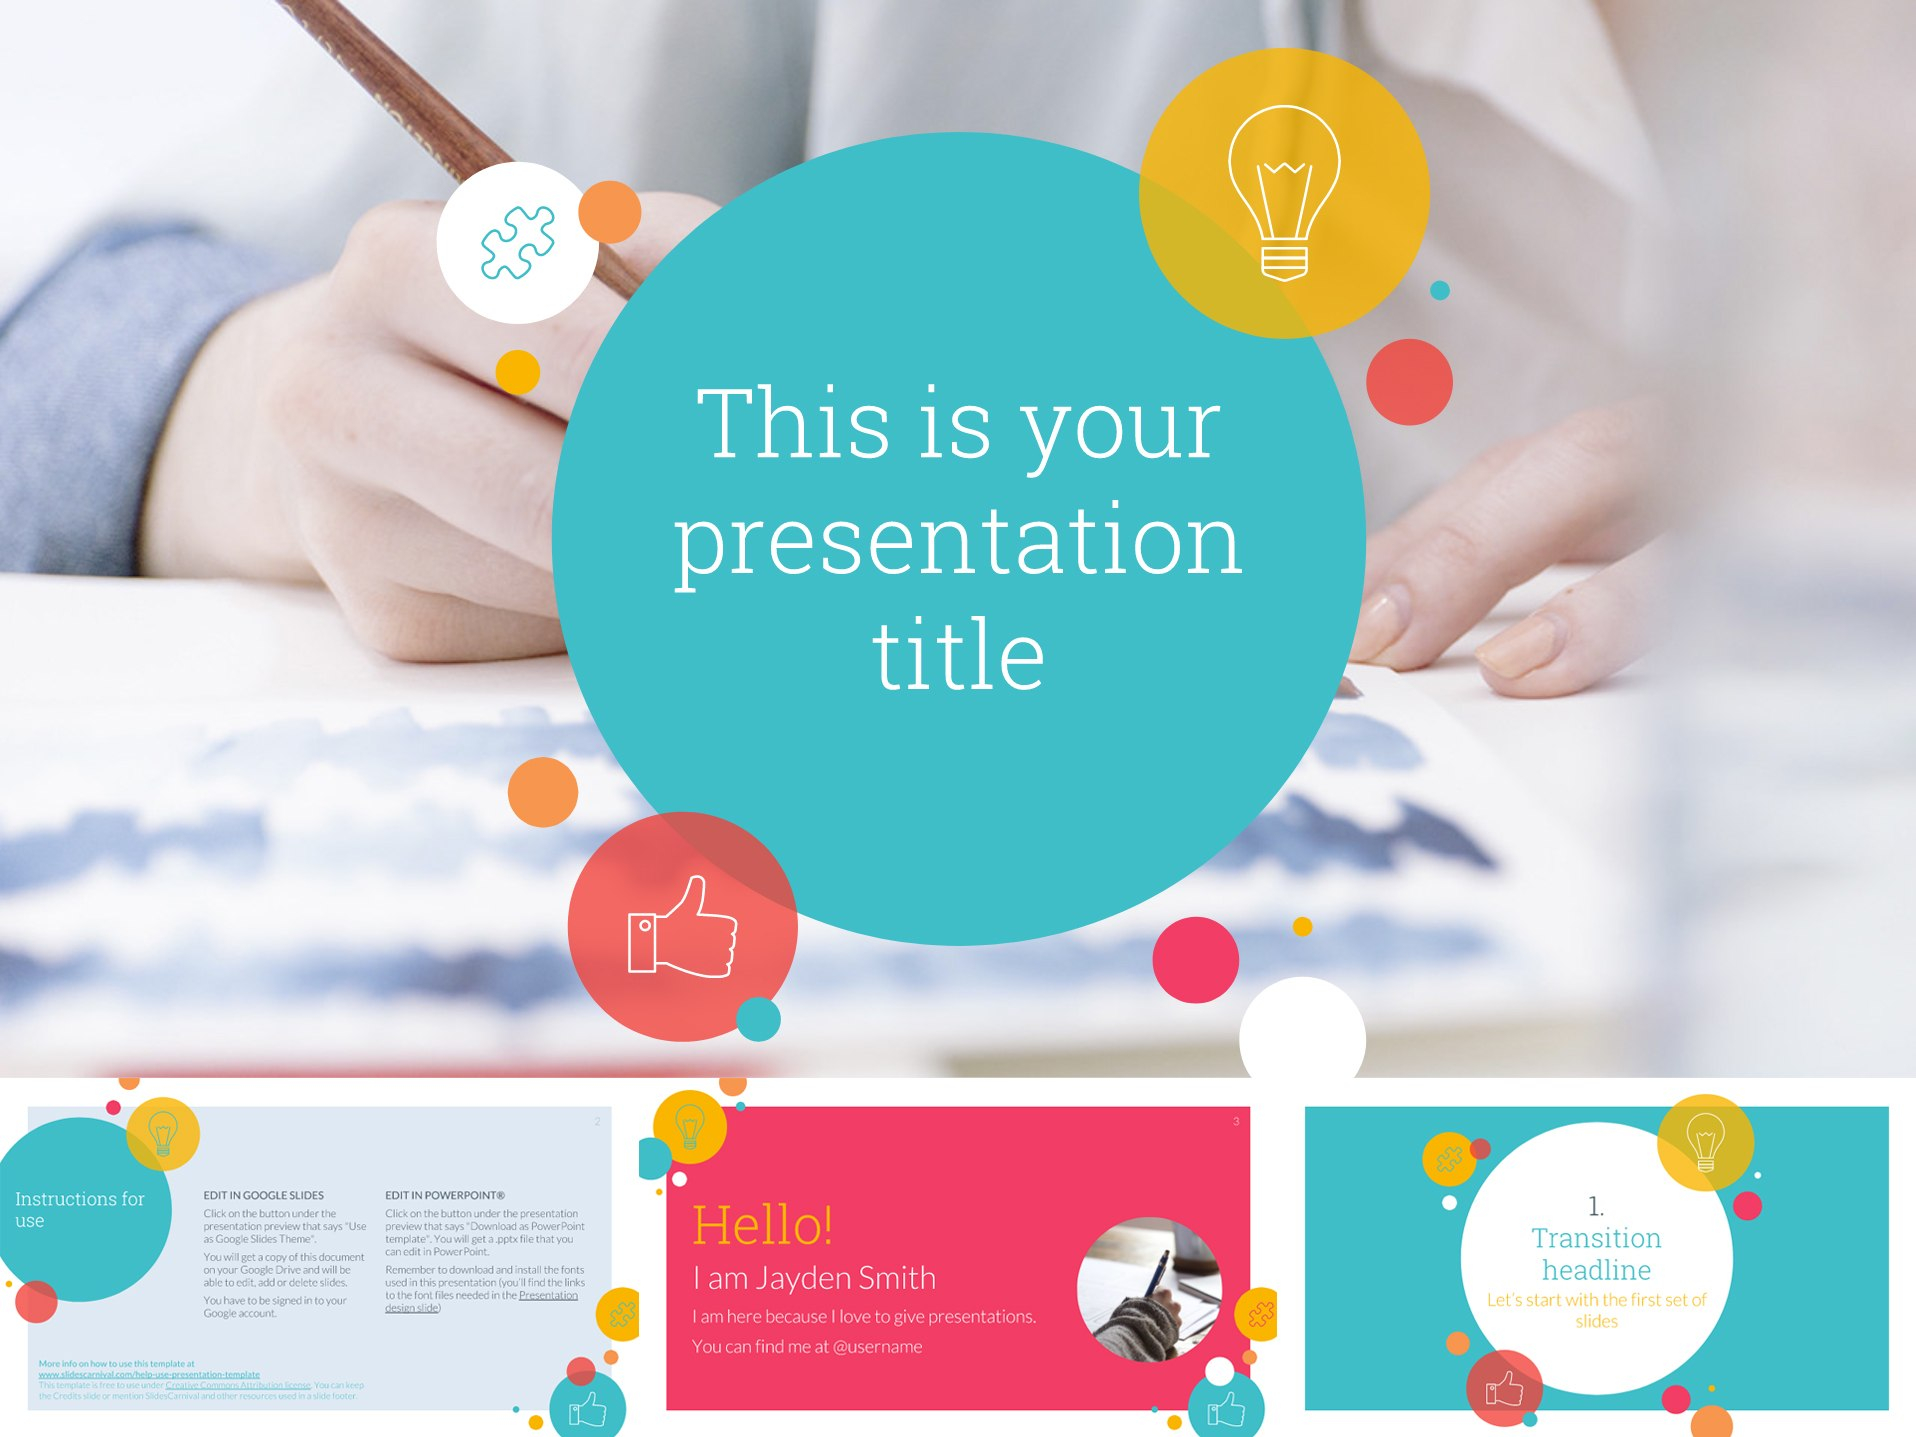 Free Google Slides Templates For Your Next Presentation with Google Drive Presentation Templates